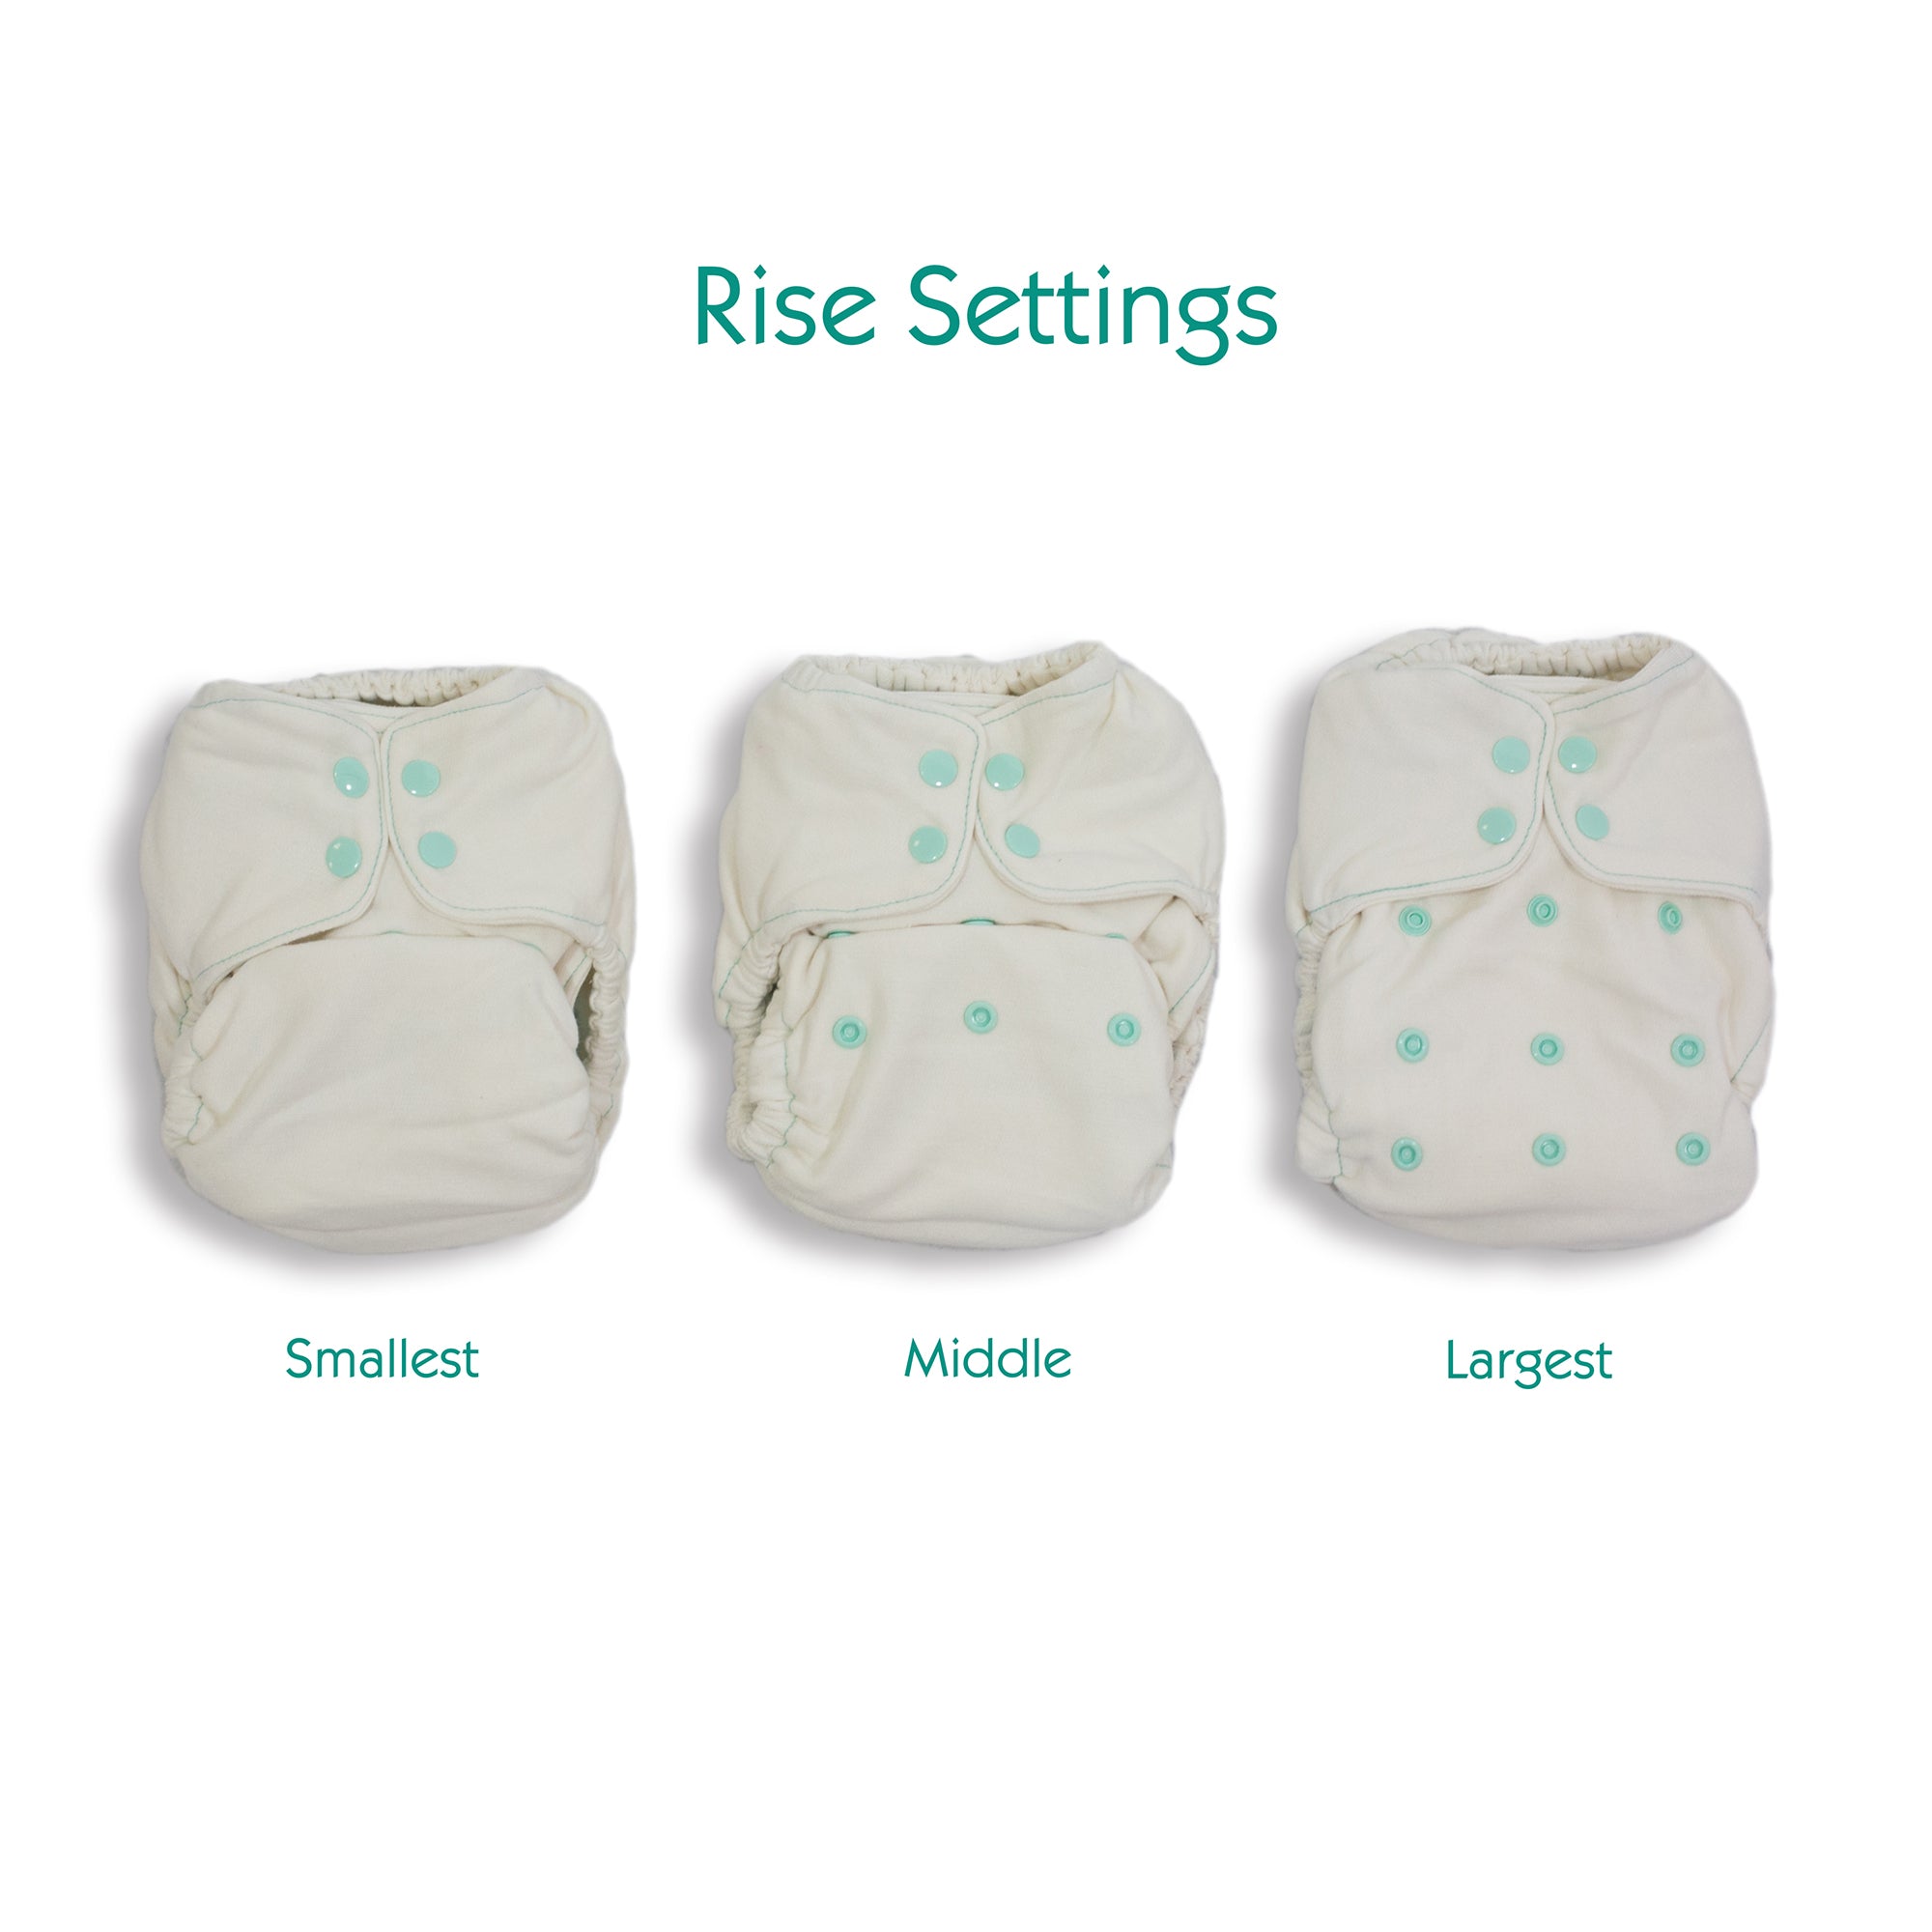 -image of fitted rise settings